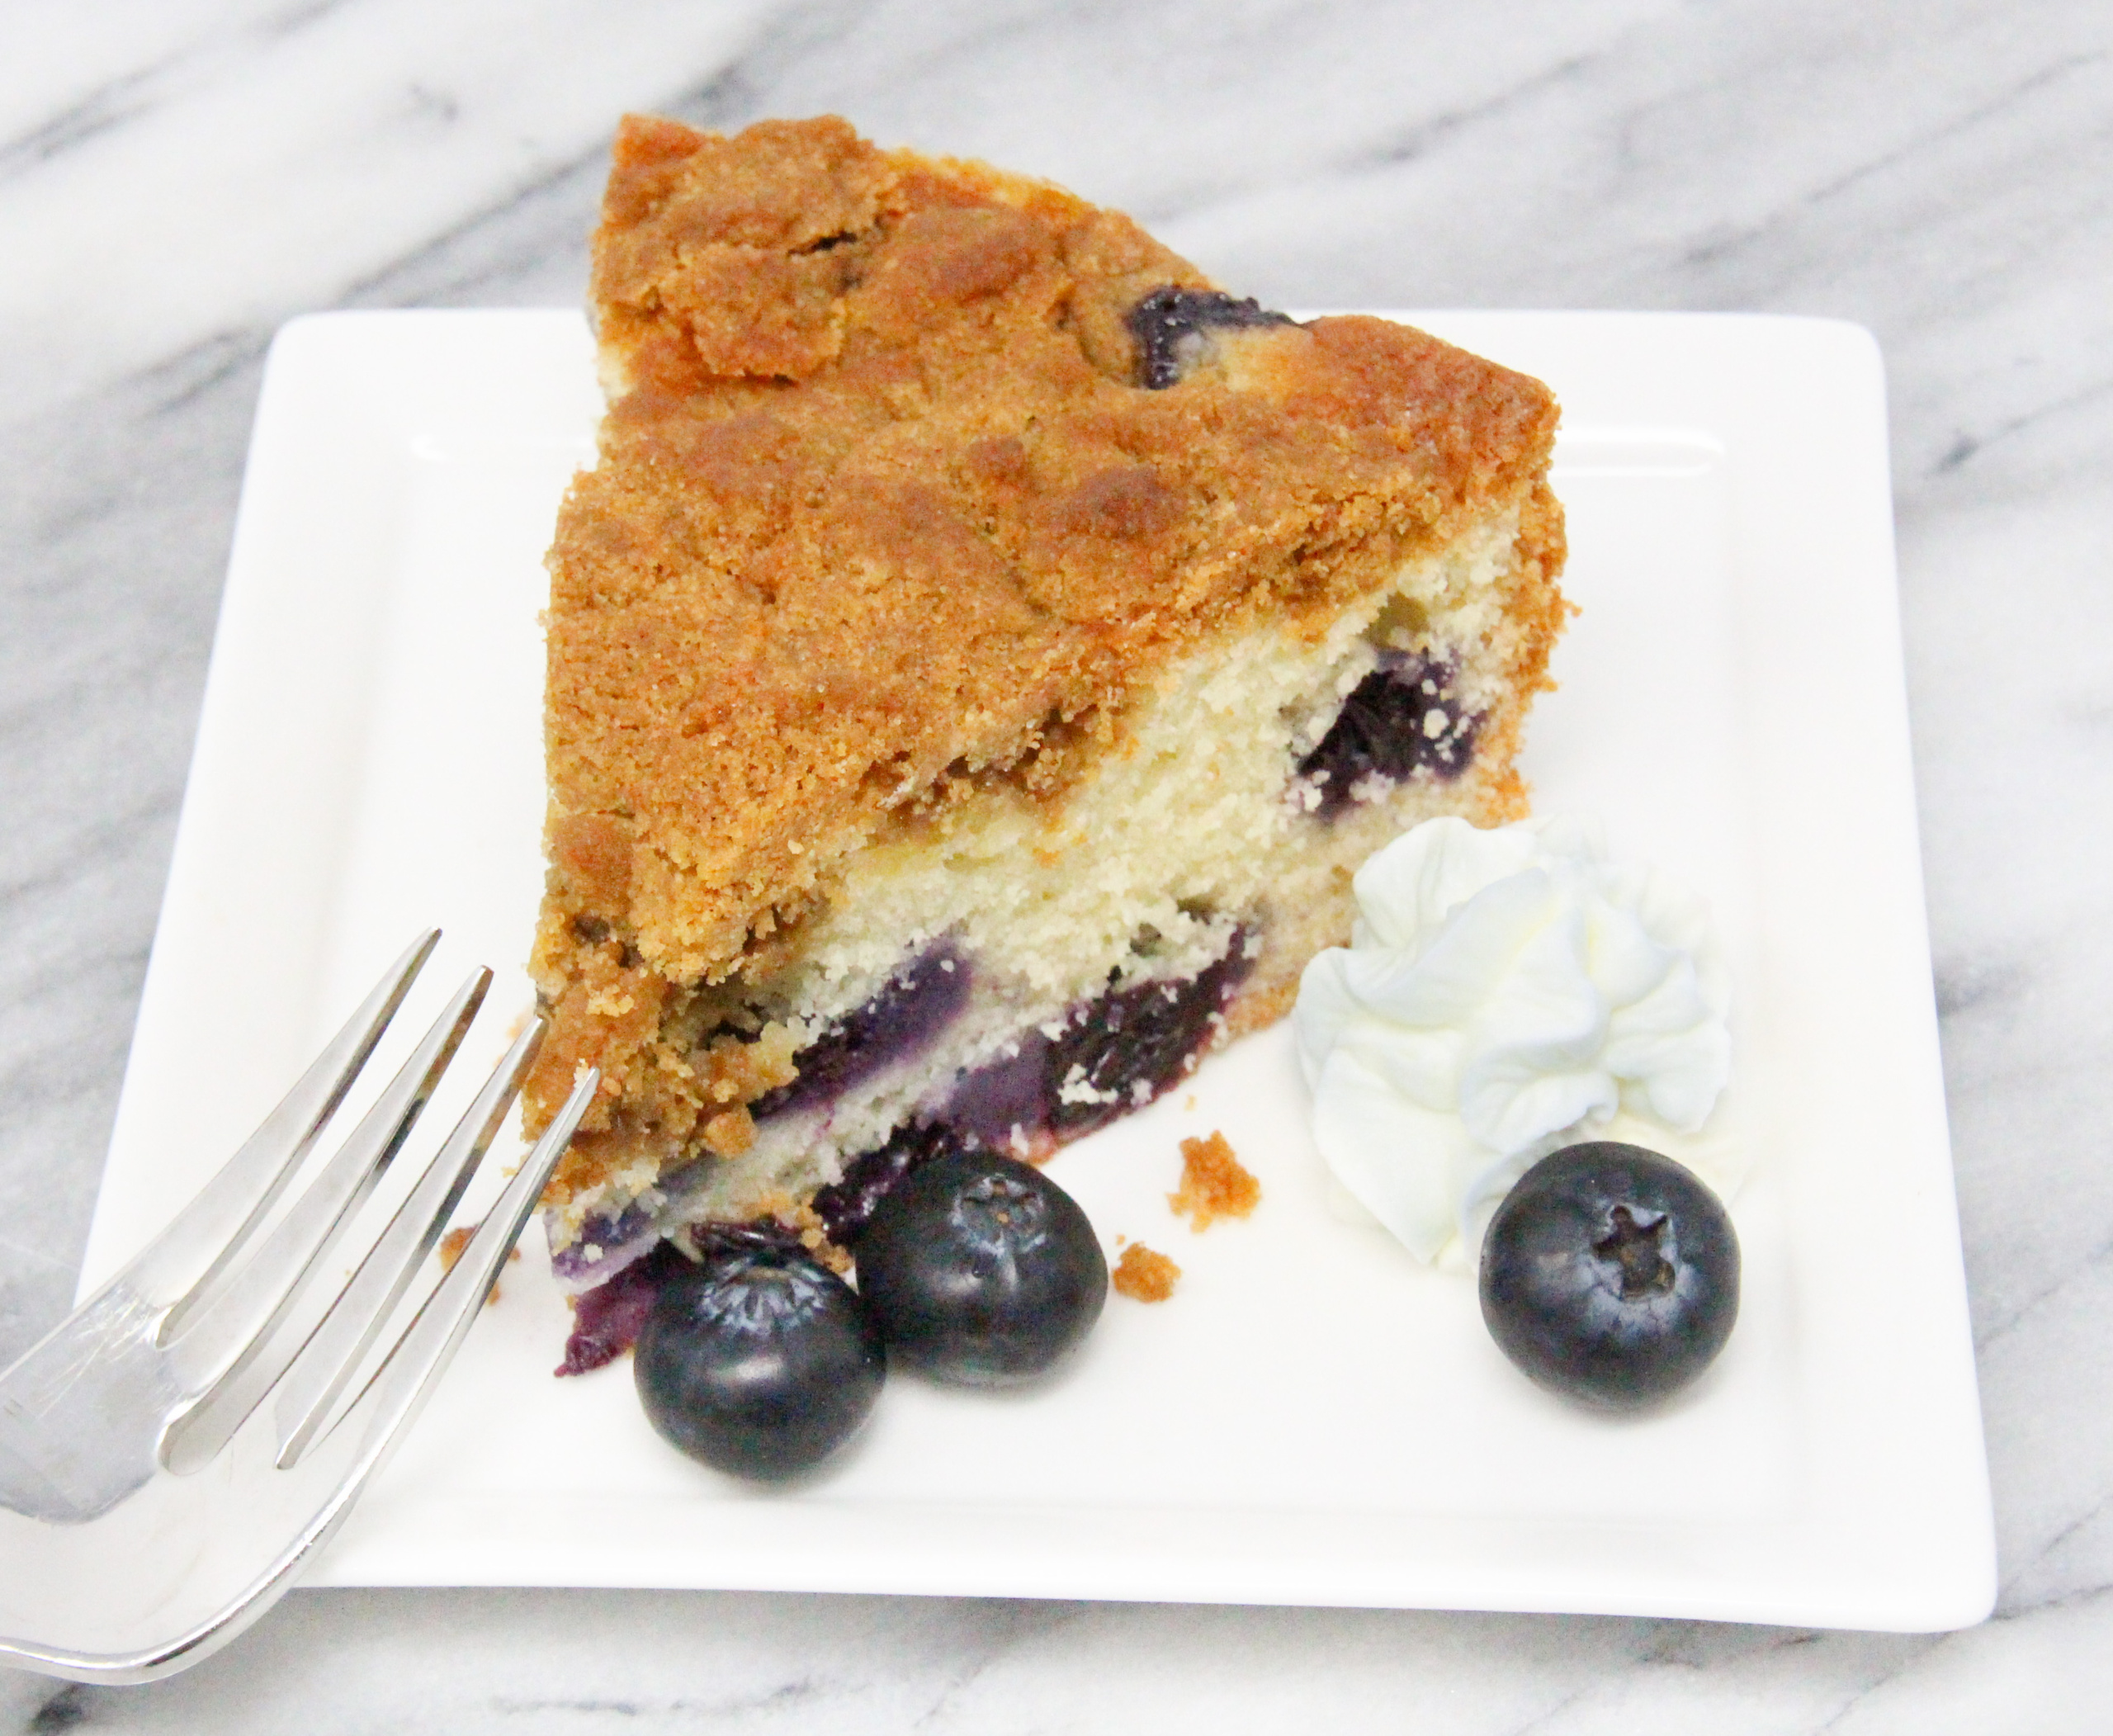 Blueberry Buckle has thick, crunchy streusel topping which enhances the sweet vanilla cake studded with fresh blueberries. With a dollop of freshly whipped cream, this really is darn fine! Recipe shared with permission granted by Amy Pershing, author of MURDER IS NO PICNIC.